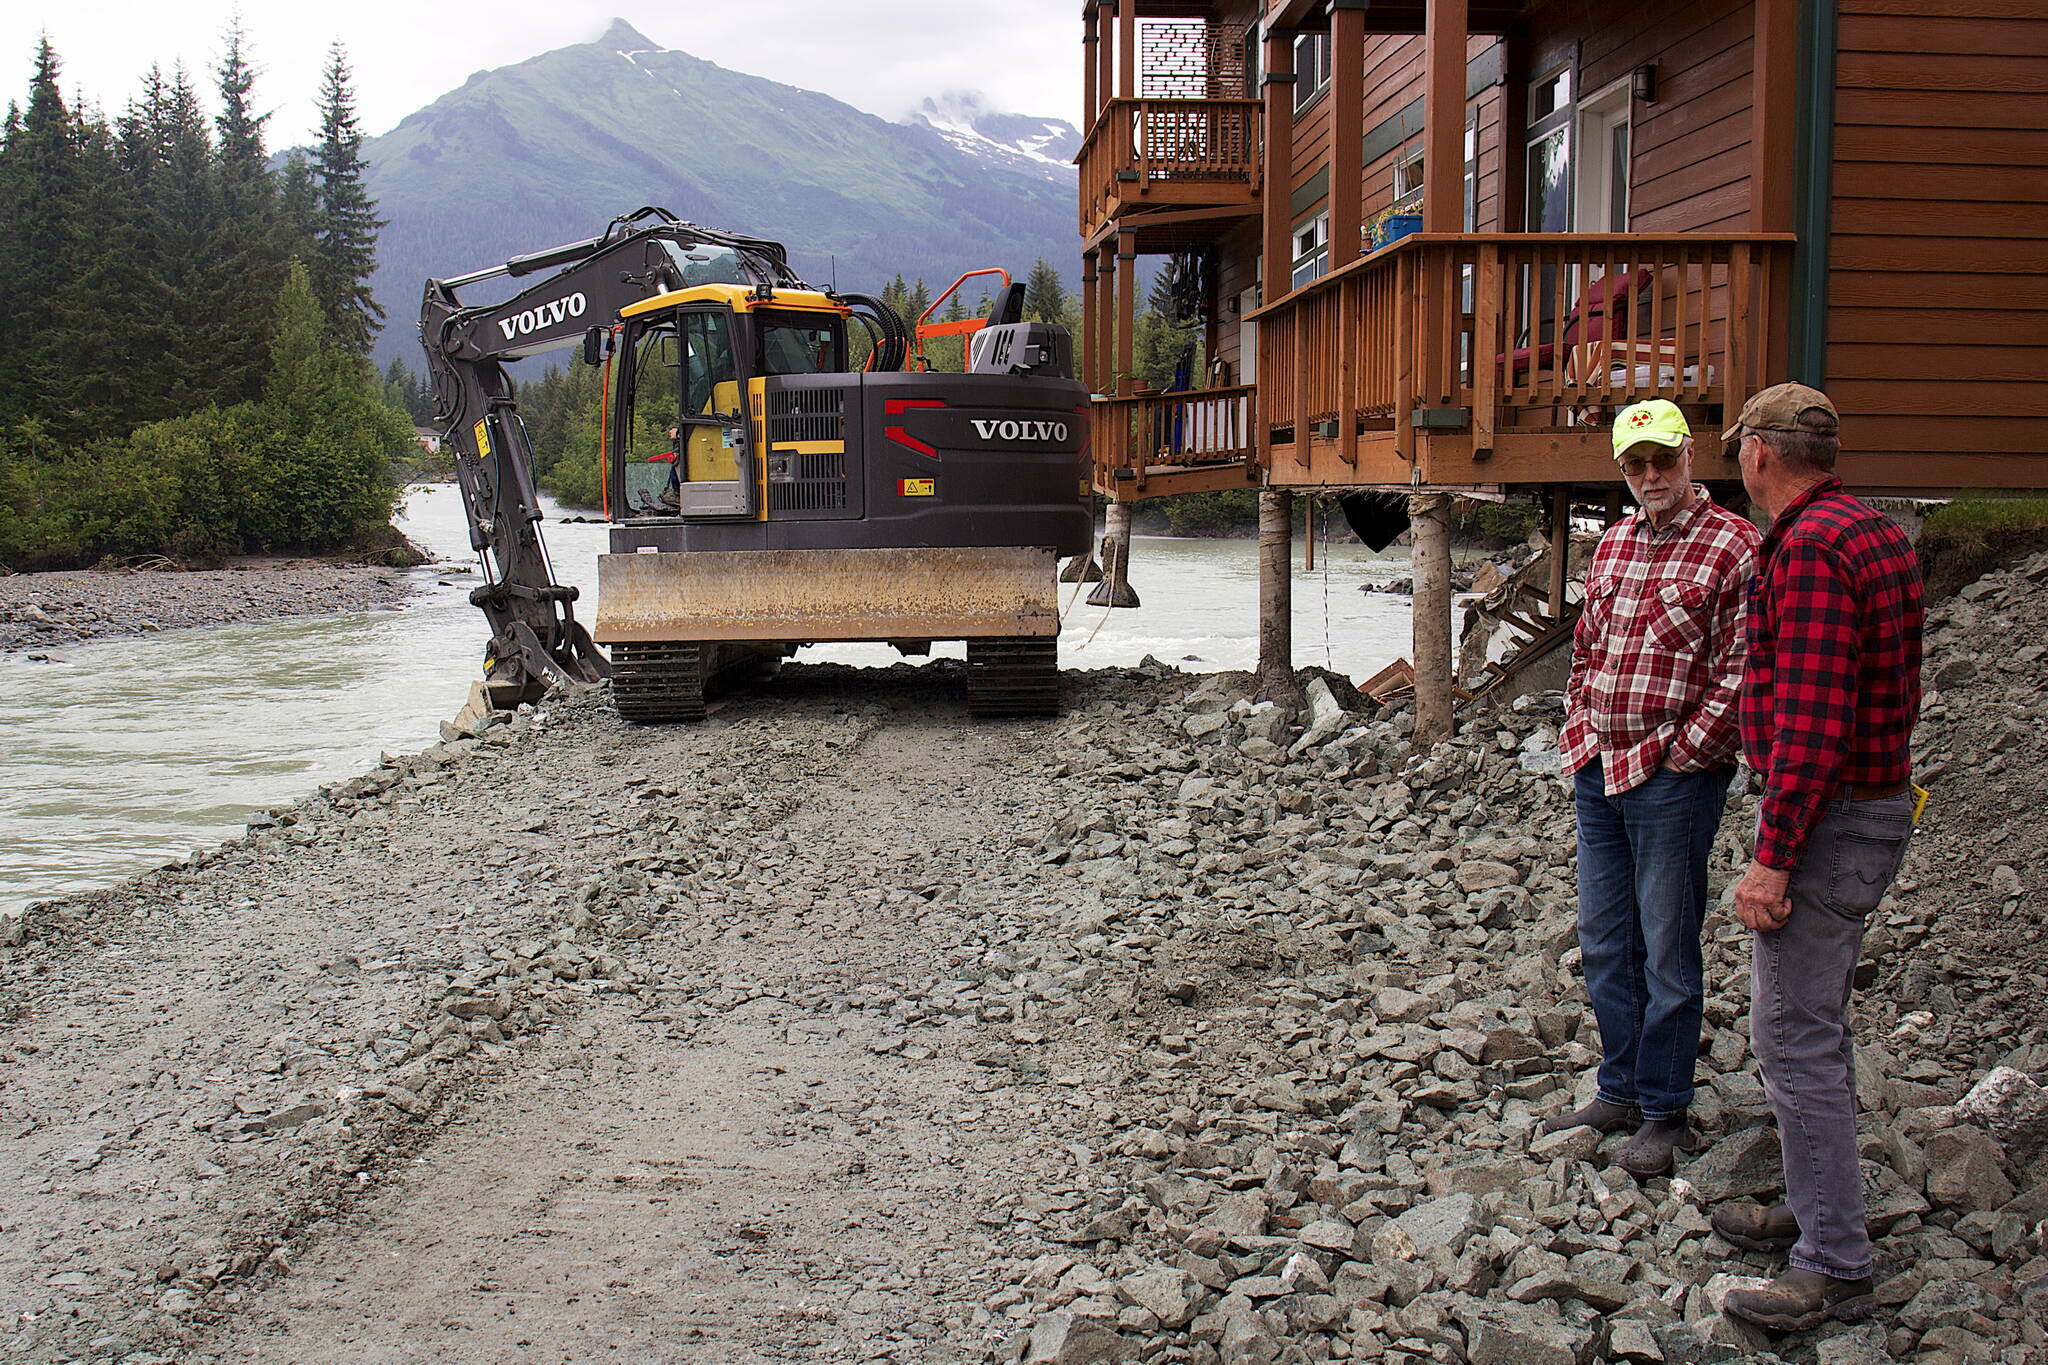 Steve Bradford (left) and Mark Kissel, both vice presidents of the Riverside Condominiums Homeowners Association, discuss repairs to two of the complex’s buildings on Aug. 9 as a bulldozer places rock fill under a corner of one building exposed by erosion during record flooding of the Mendenhall River on Aug. 5. Repairs to both buildings ultimately were successful. (Mark Sabbatini / Juneau Empire file photo)